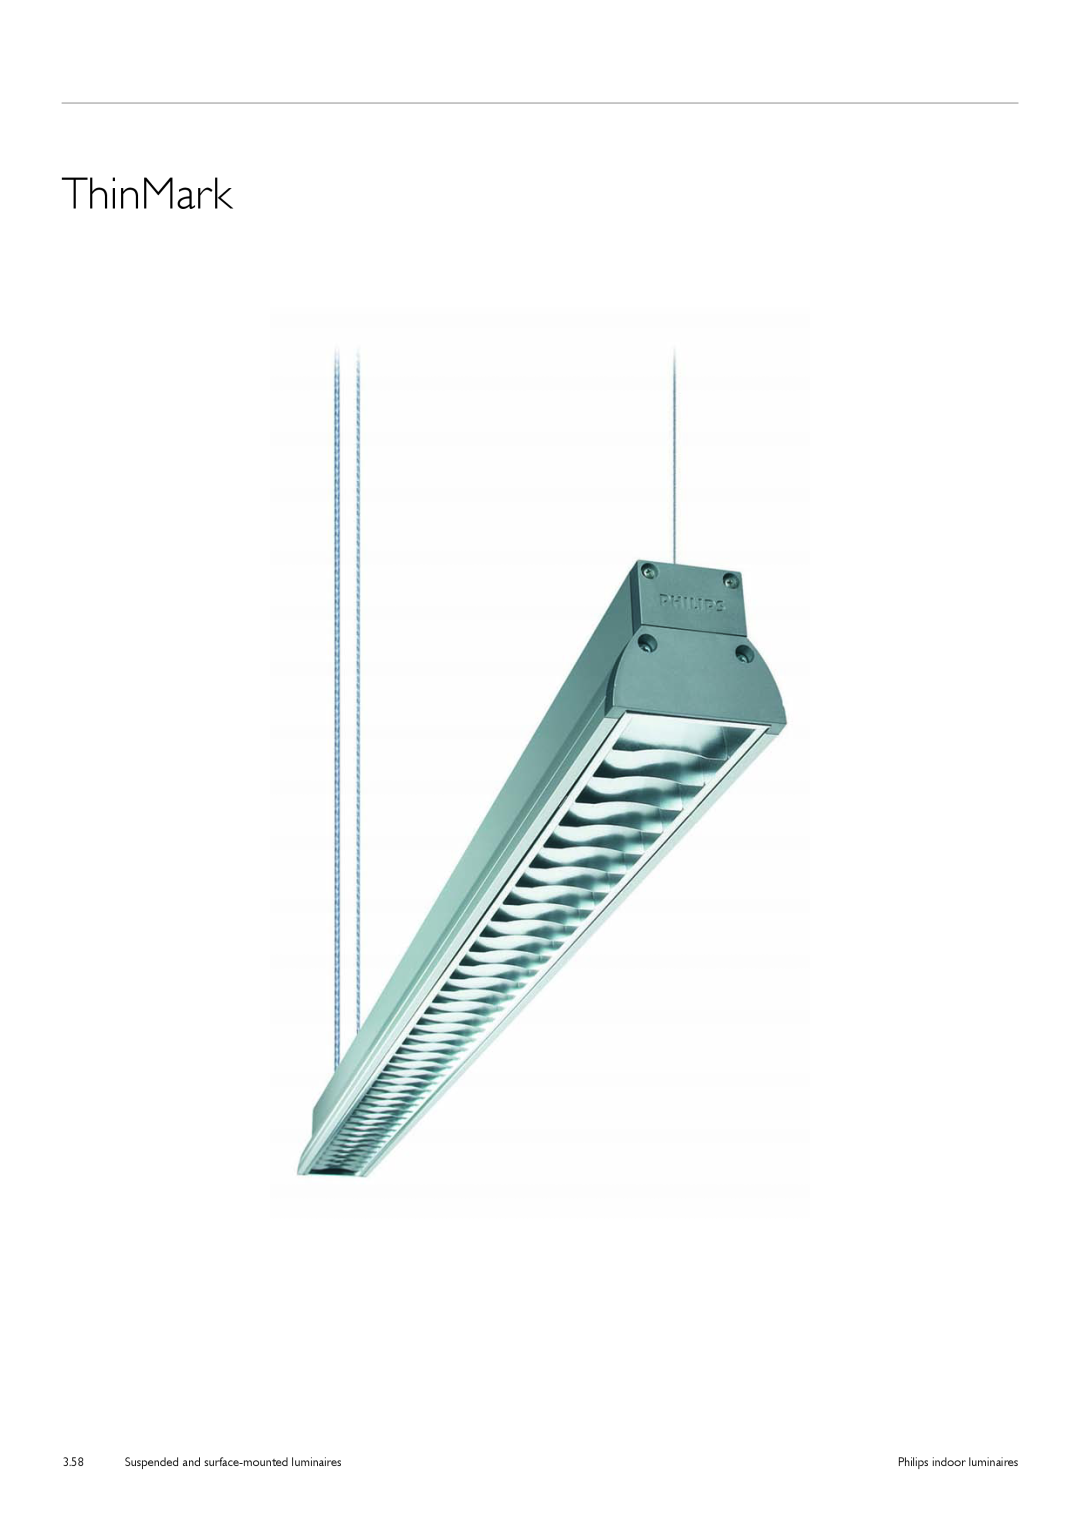 Philips TCS125 manual ThinMark, Suspended and surface-mountedluminaires, 3.58, Philips indoor luminaires 